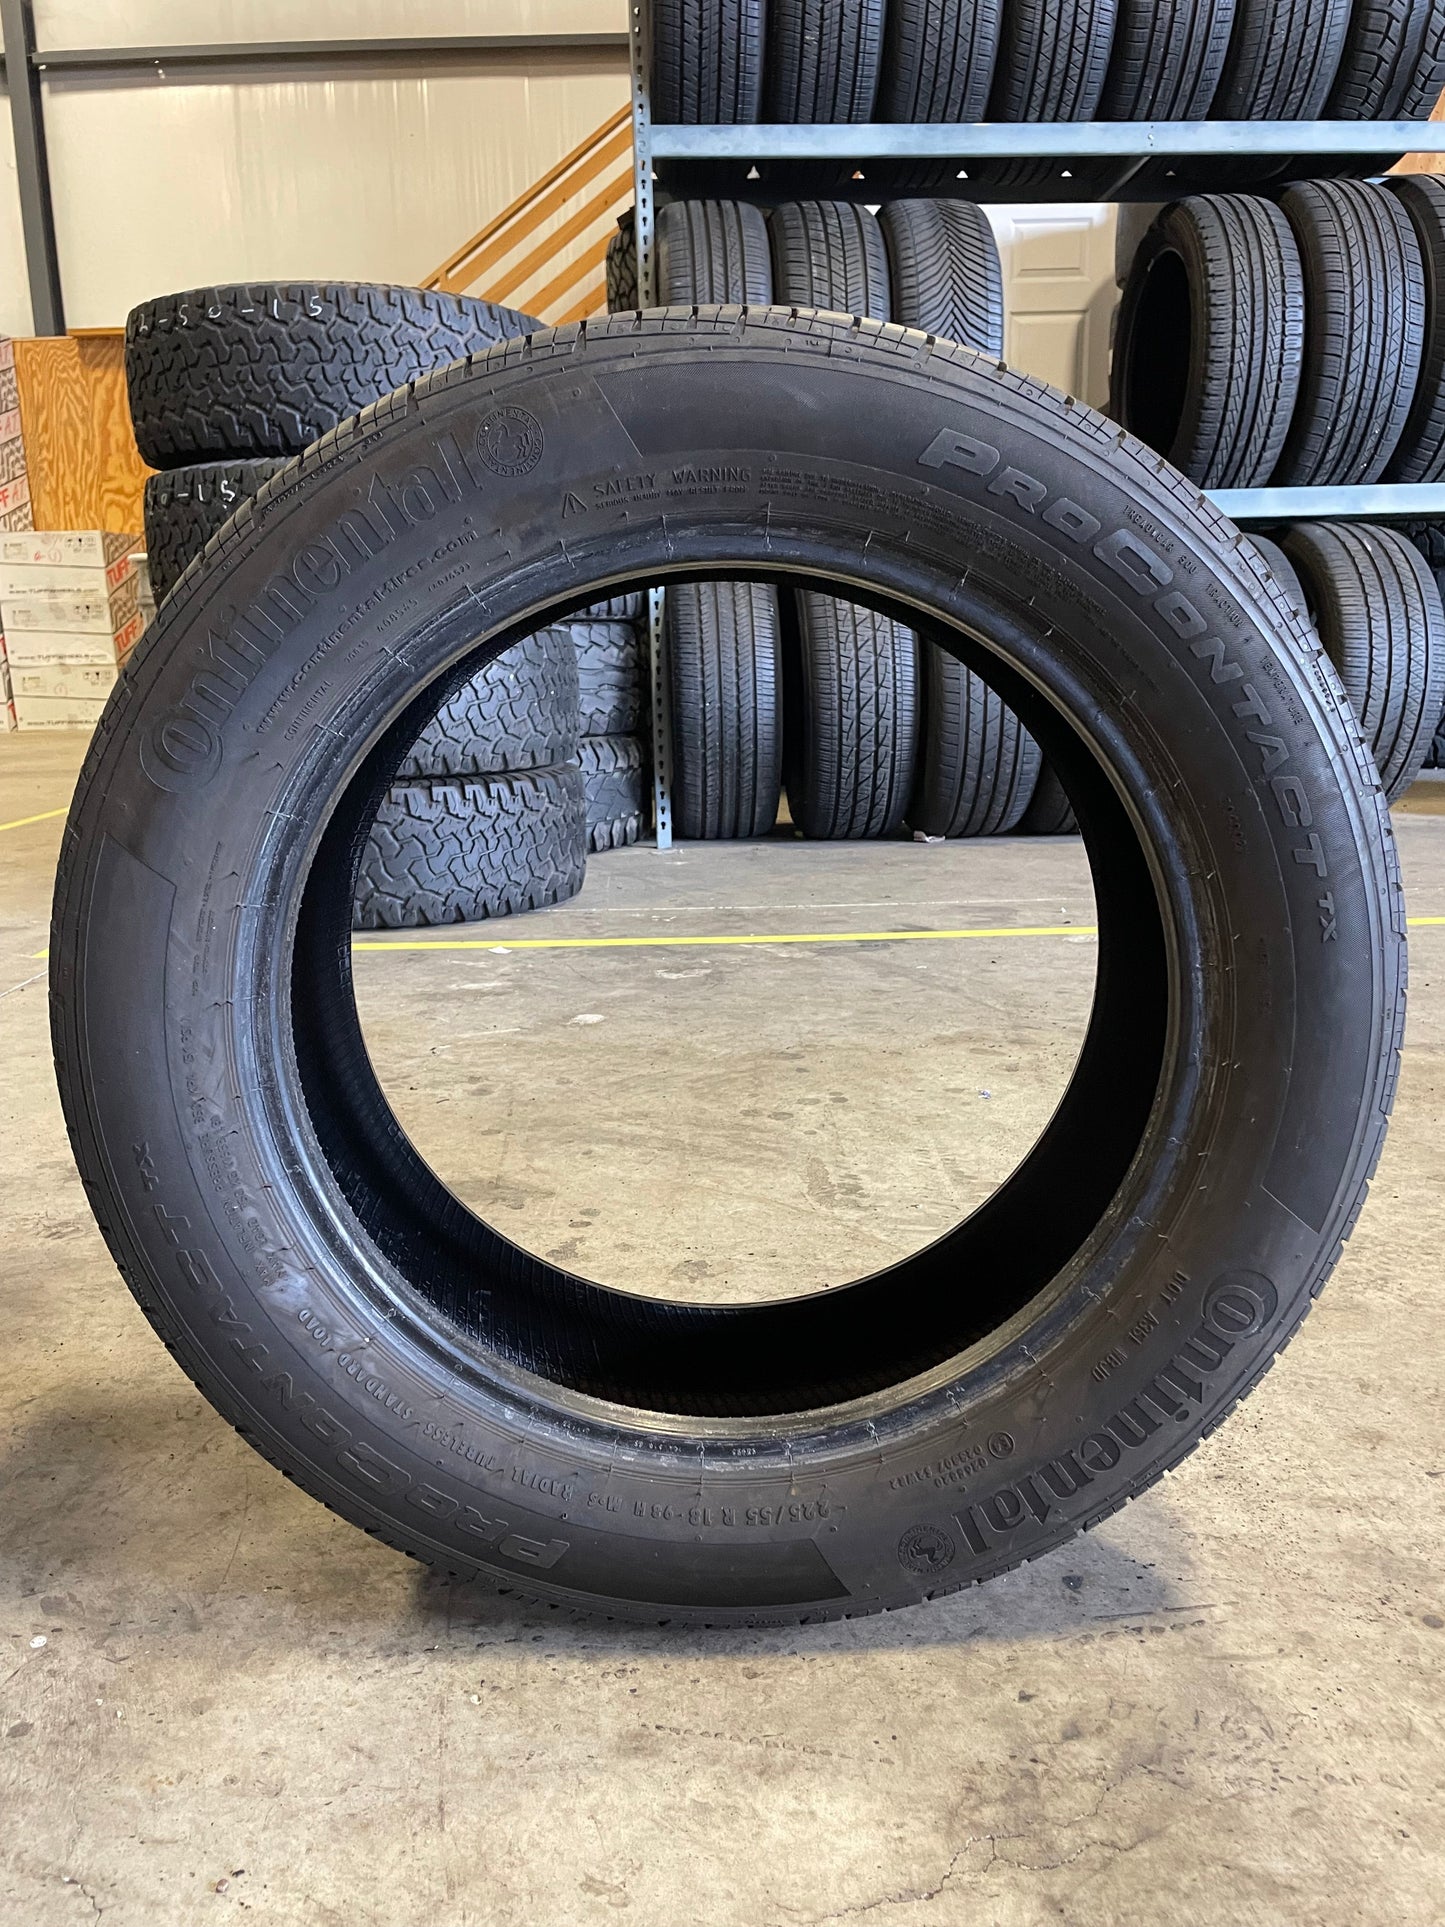 SINGLE 235/55R18 Continental ProContact TX 98 H SL - Used Tires